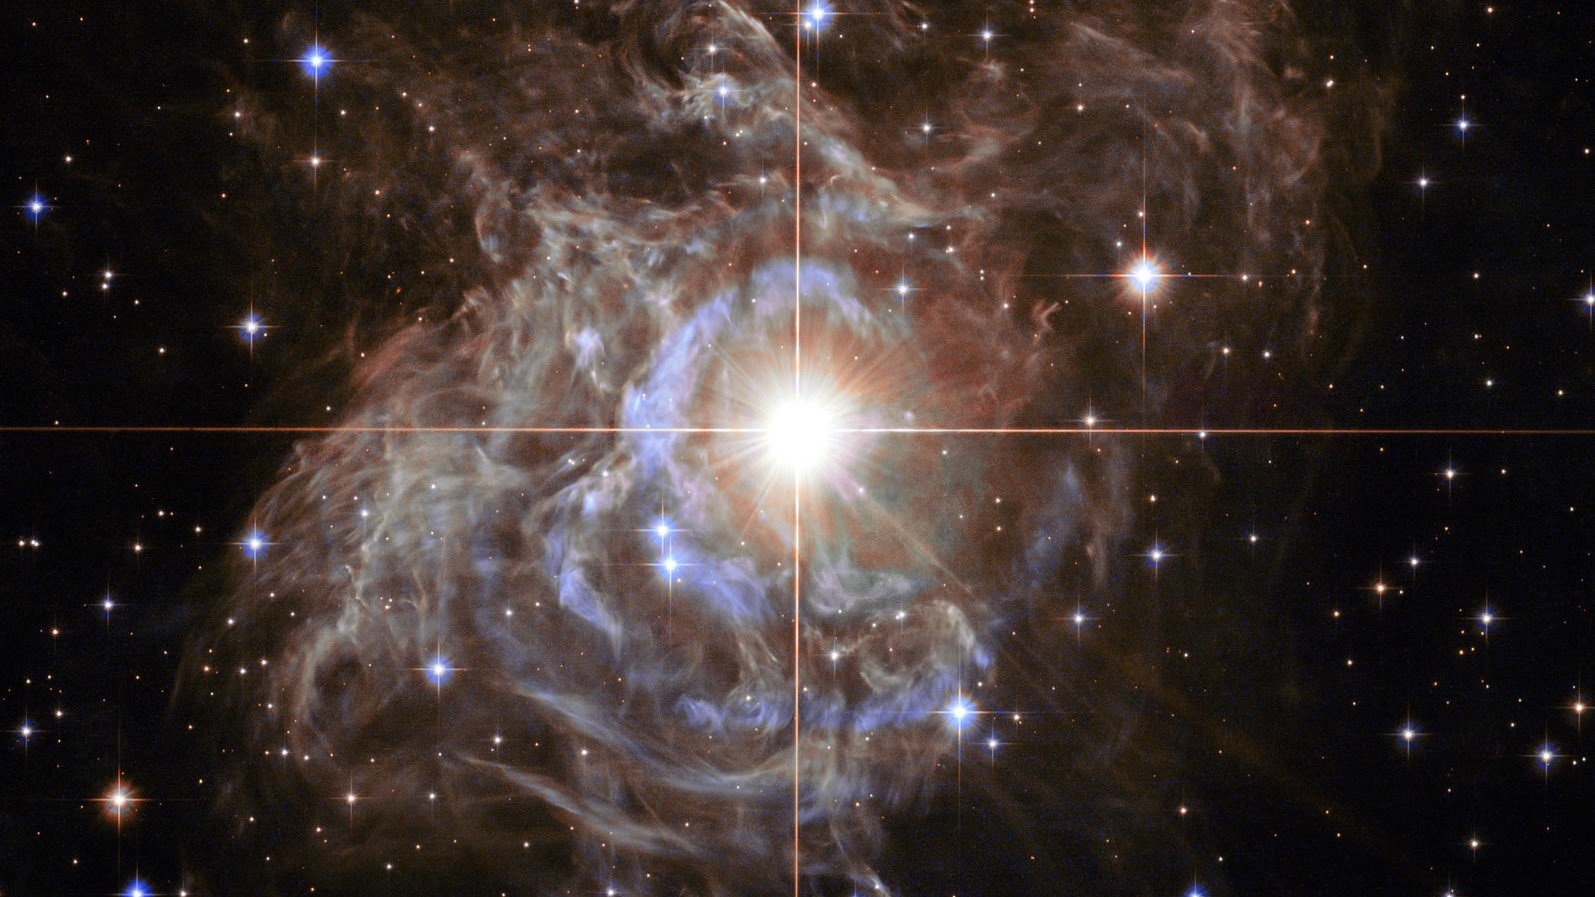 RS Puppis, a Cepheid star located 6,000 light-years away in the constellation Puppis and imaged by the Hubble Space Telescope..